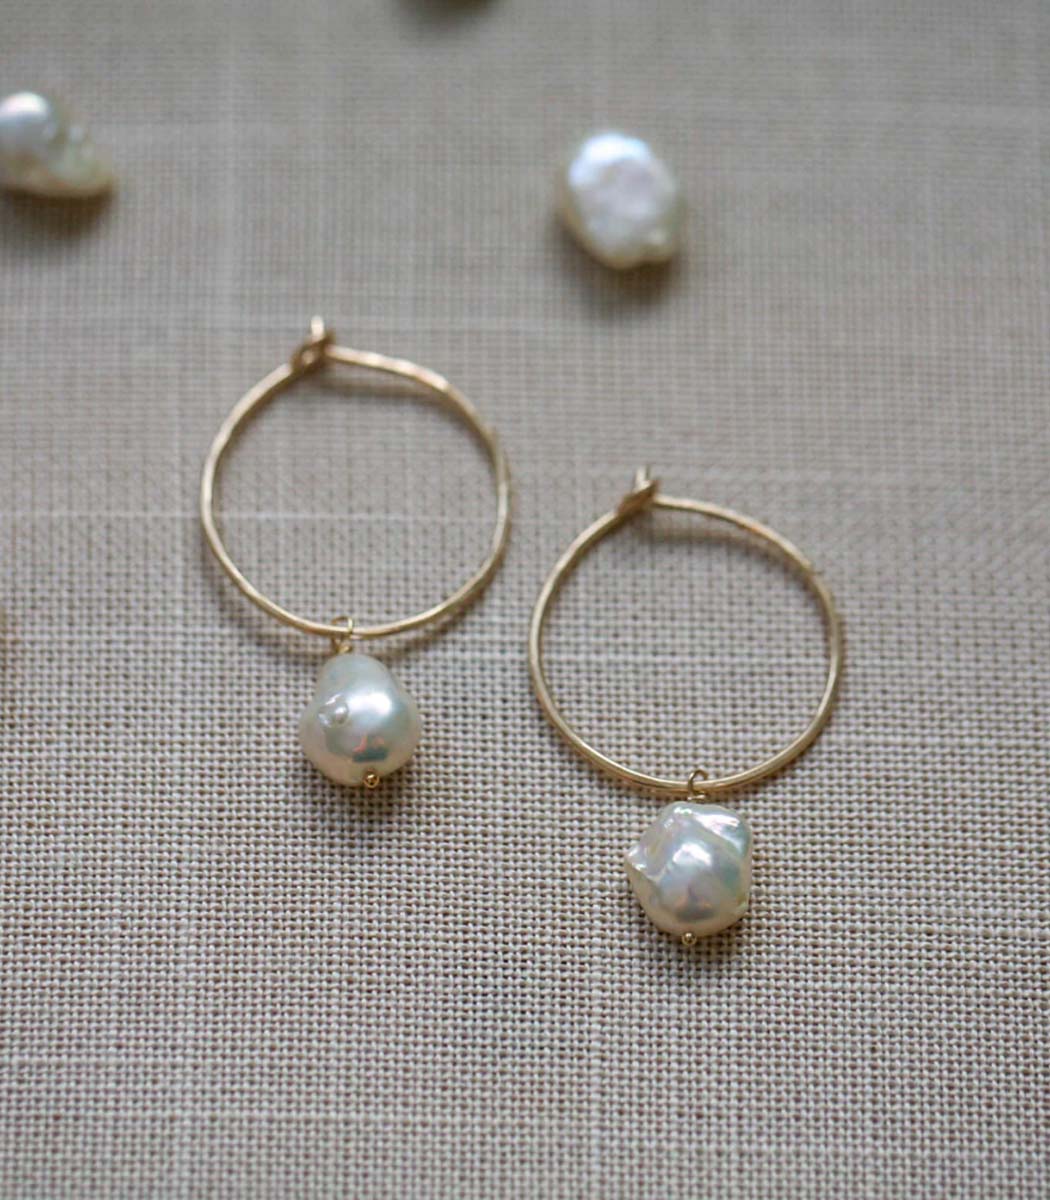 Small rings with pearls